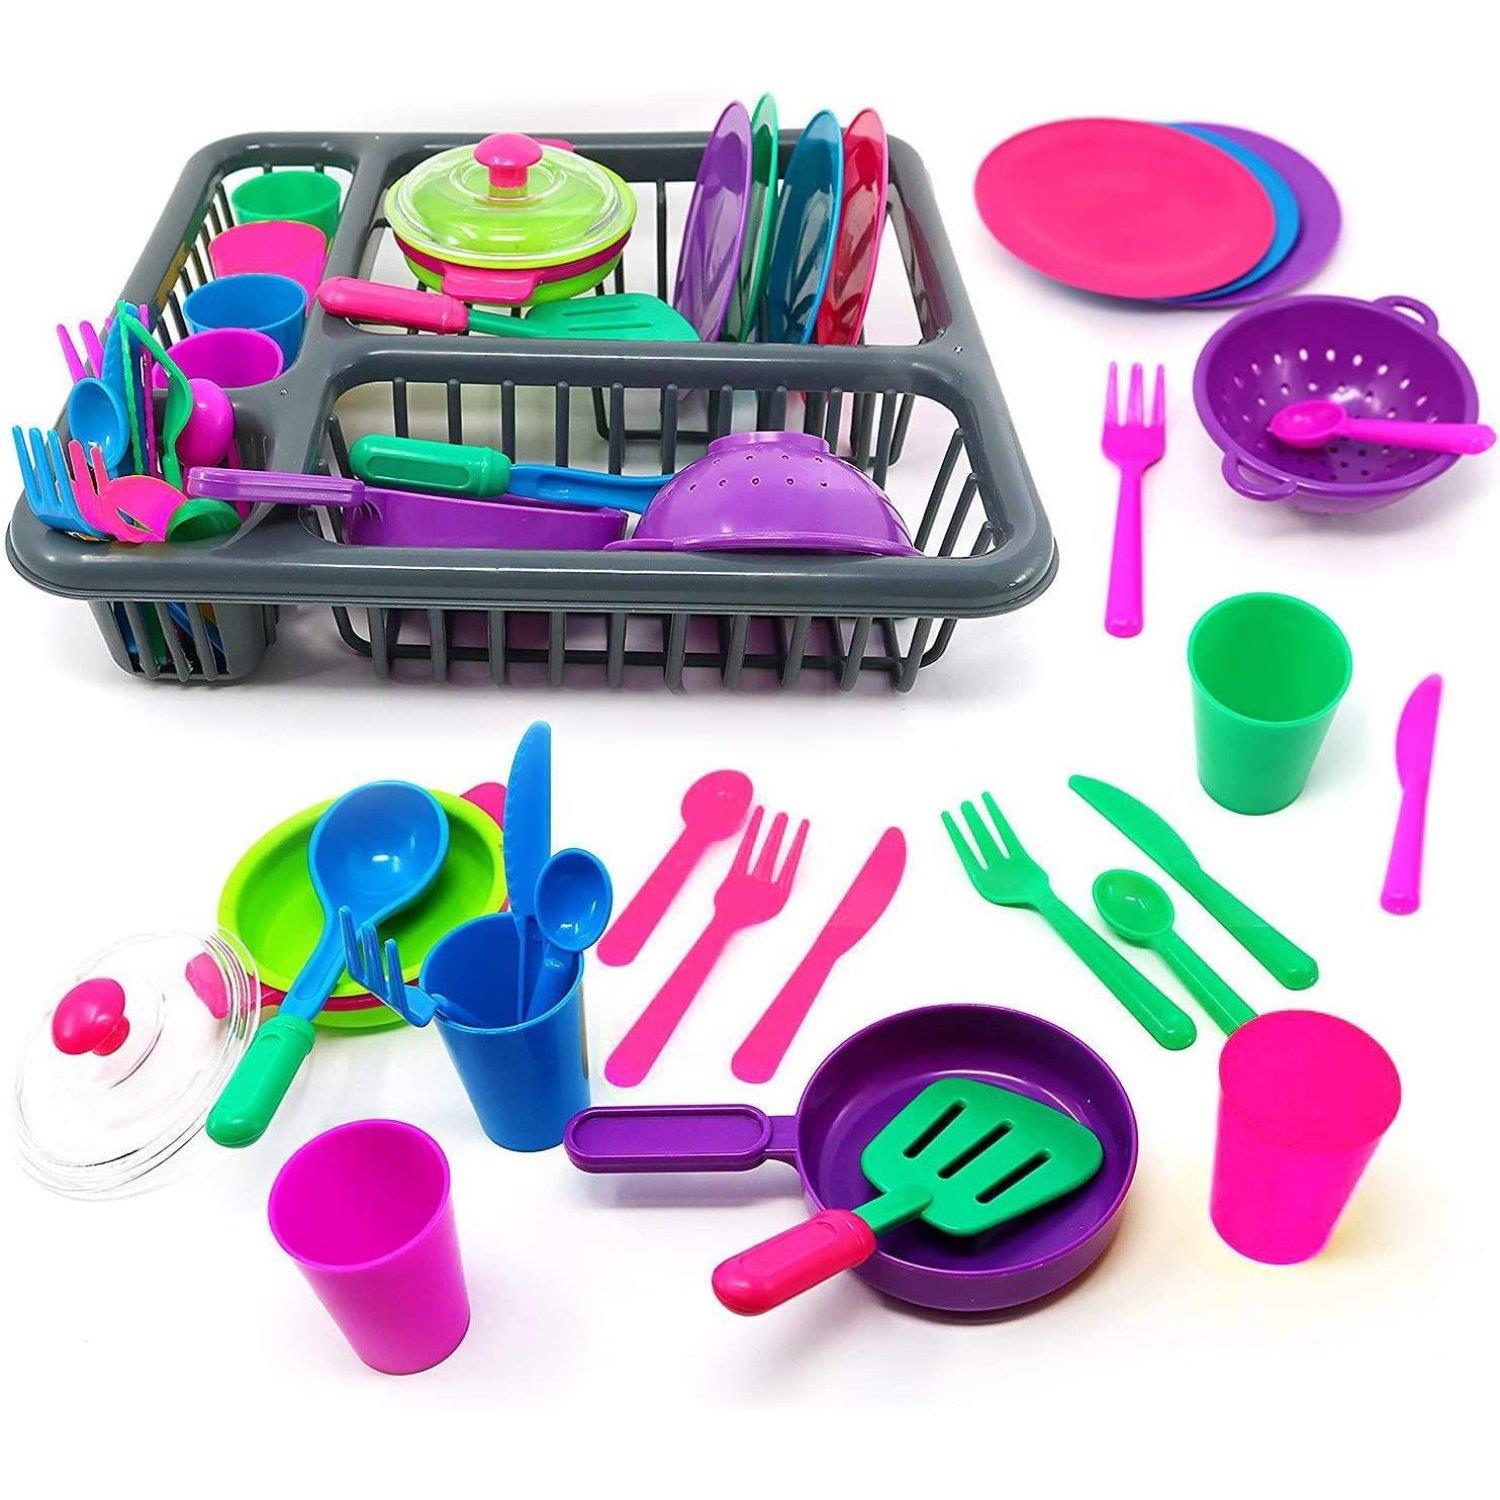 The Magic Toy Shop 27 Pieces Kitchen Accessories Play Set For Kids